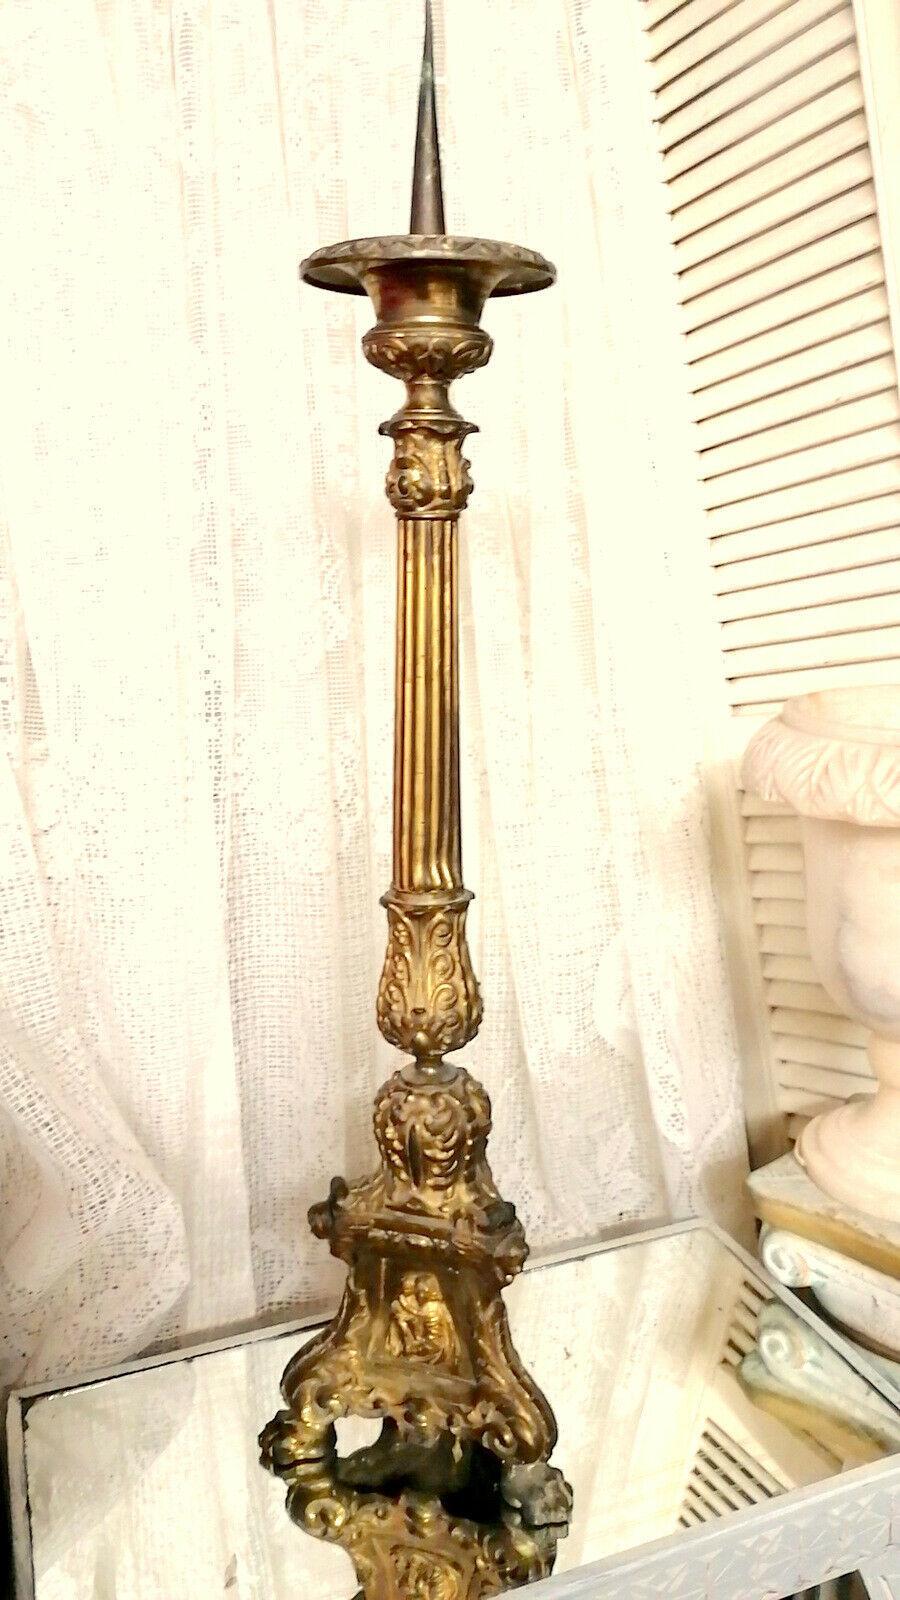 This is a 19th century 1880s French embossed solid brass church/cathedral altar candlesticks from Paris.
The item was embossed images of virgin Mary and Jesus on the sides, it is in good condition with some signs of wear and distressed in some